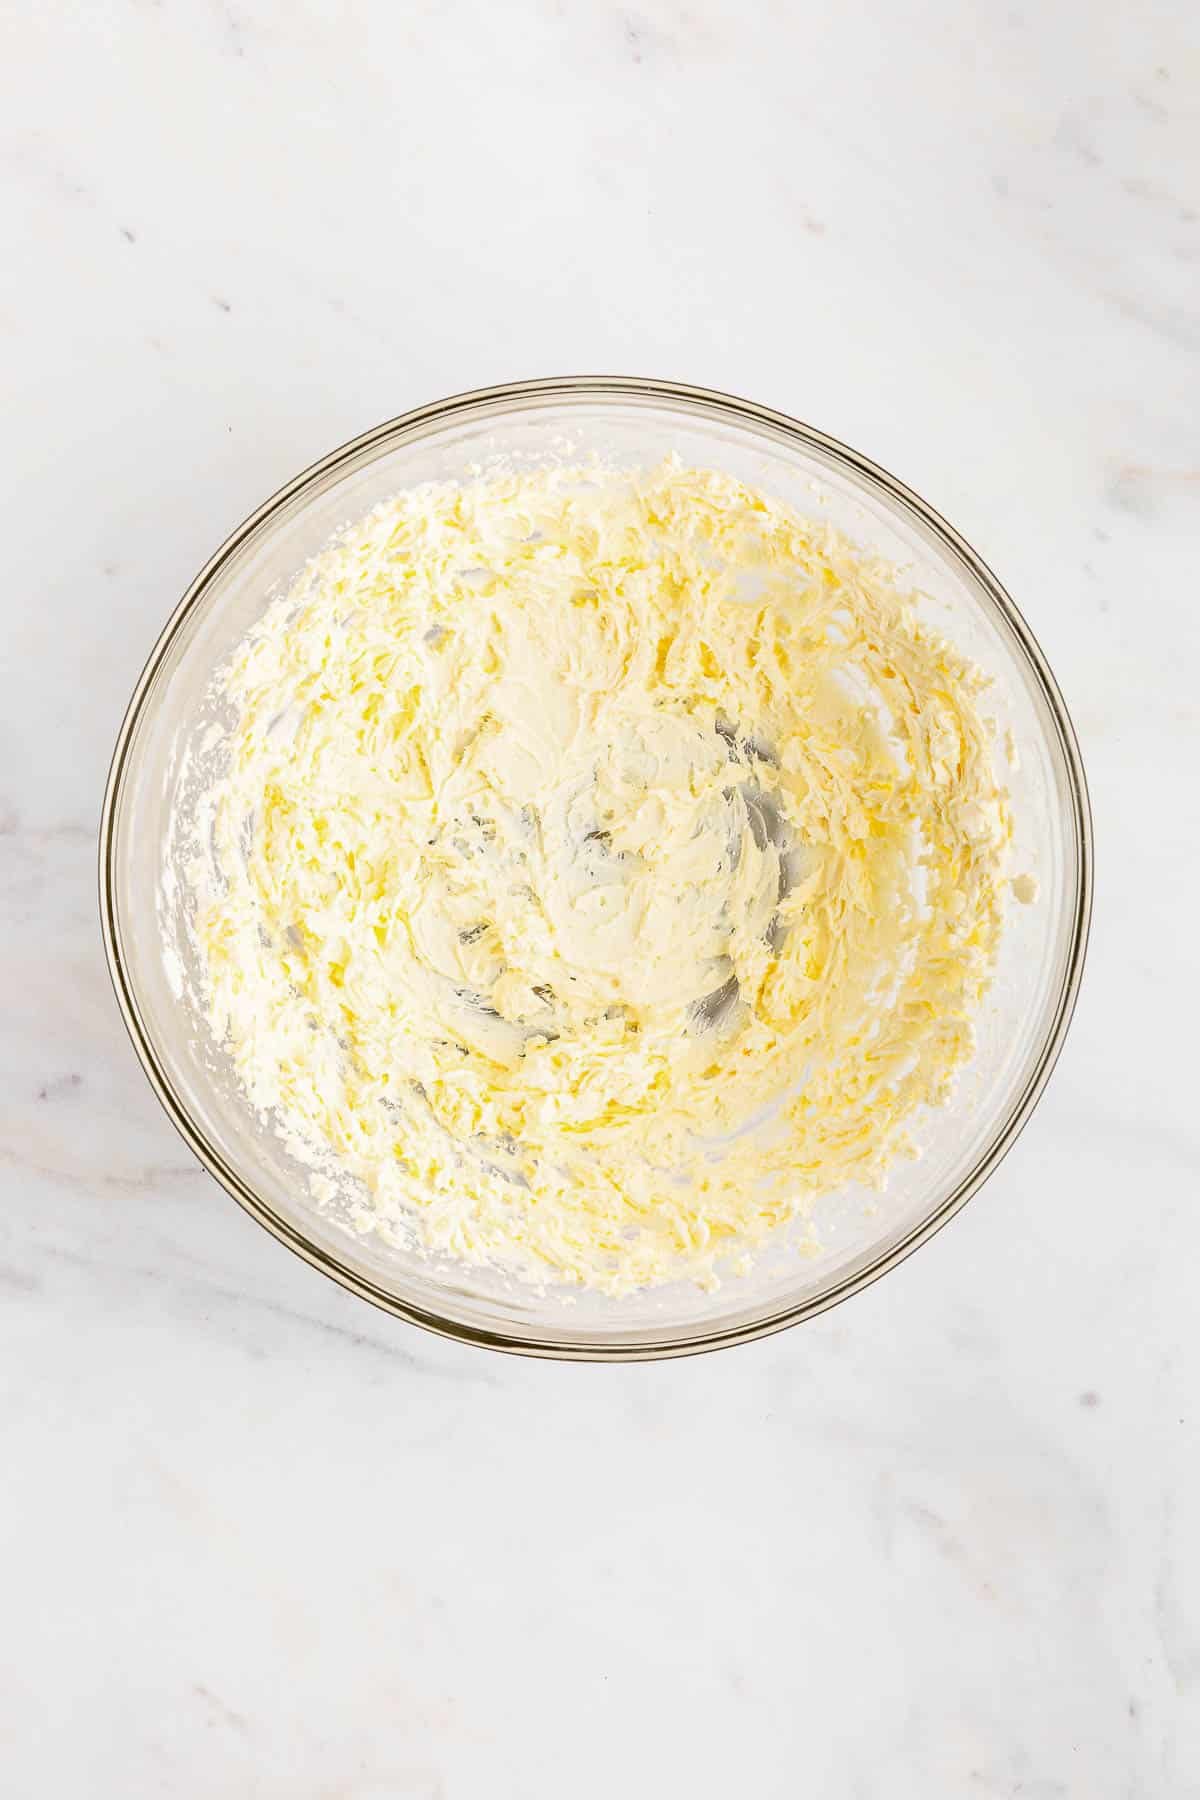 a glass bowl with whipped cream cheese.